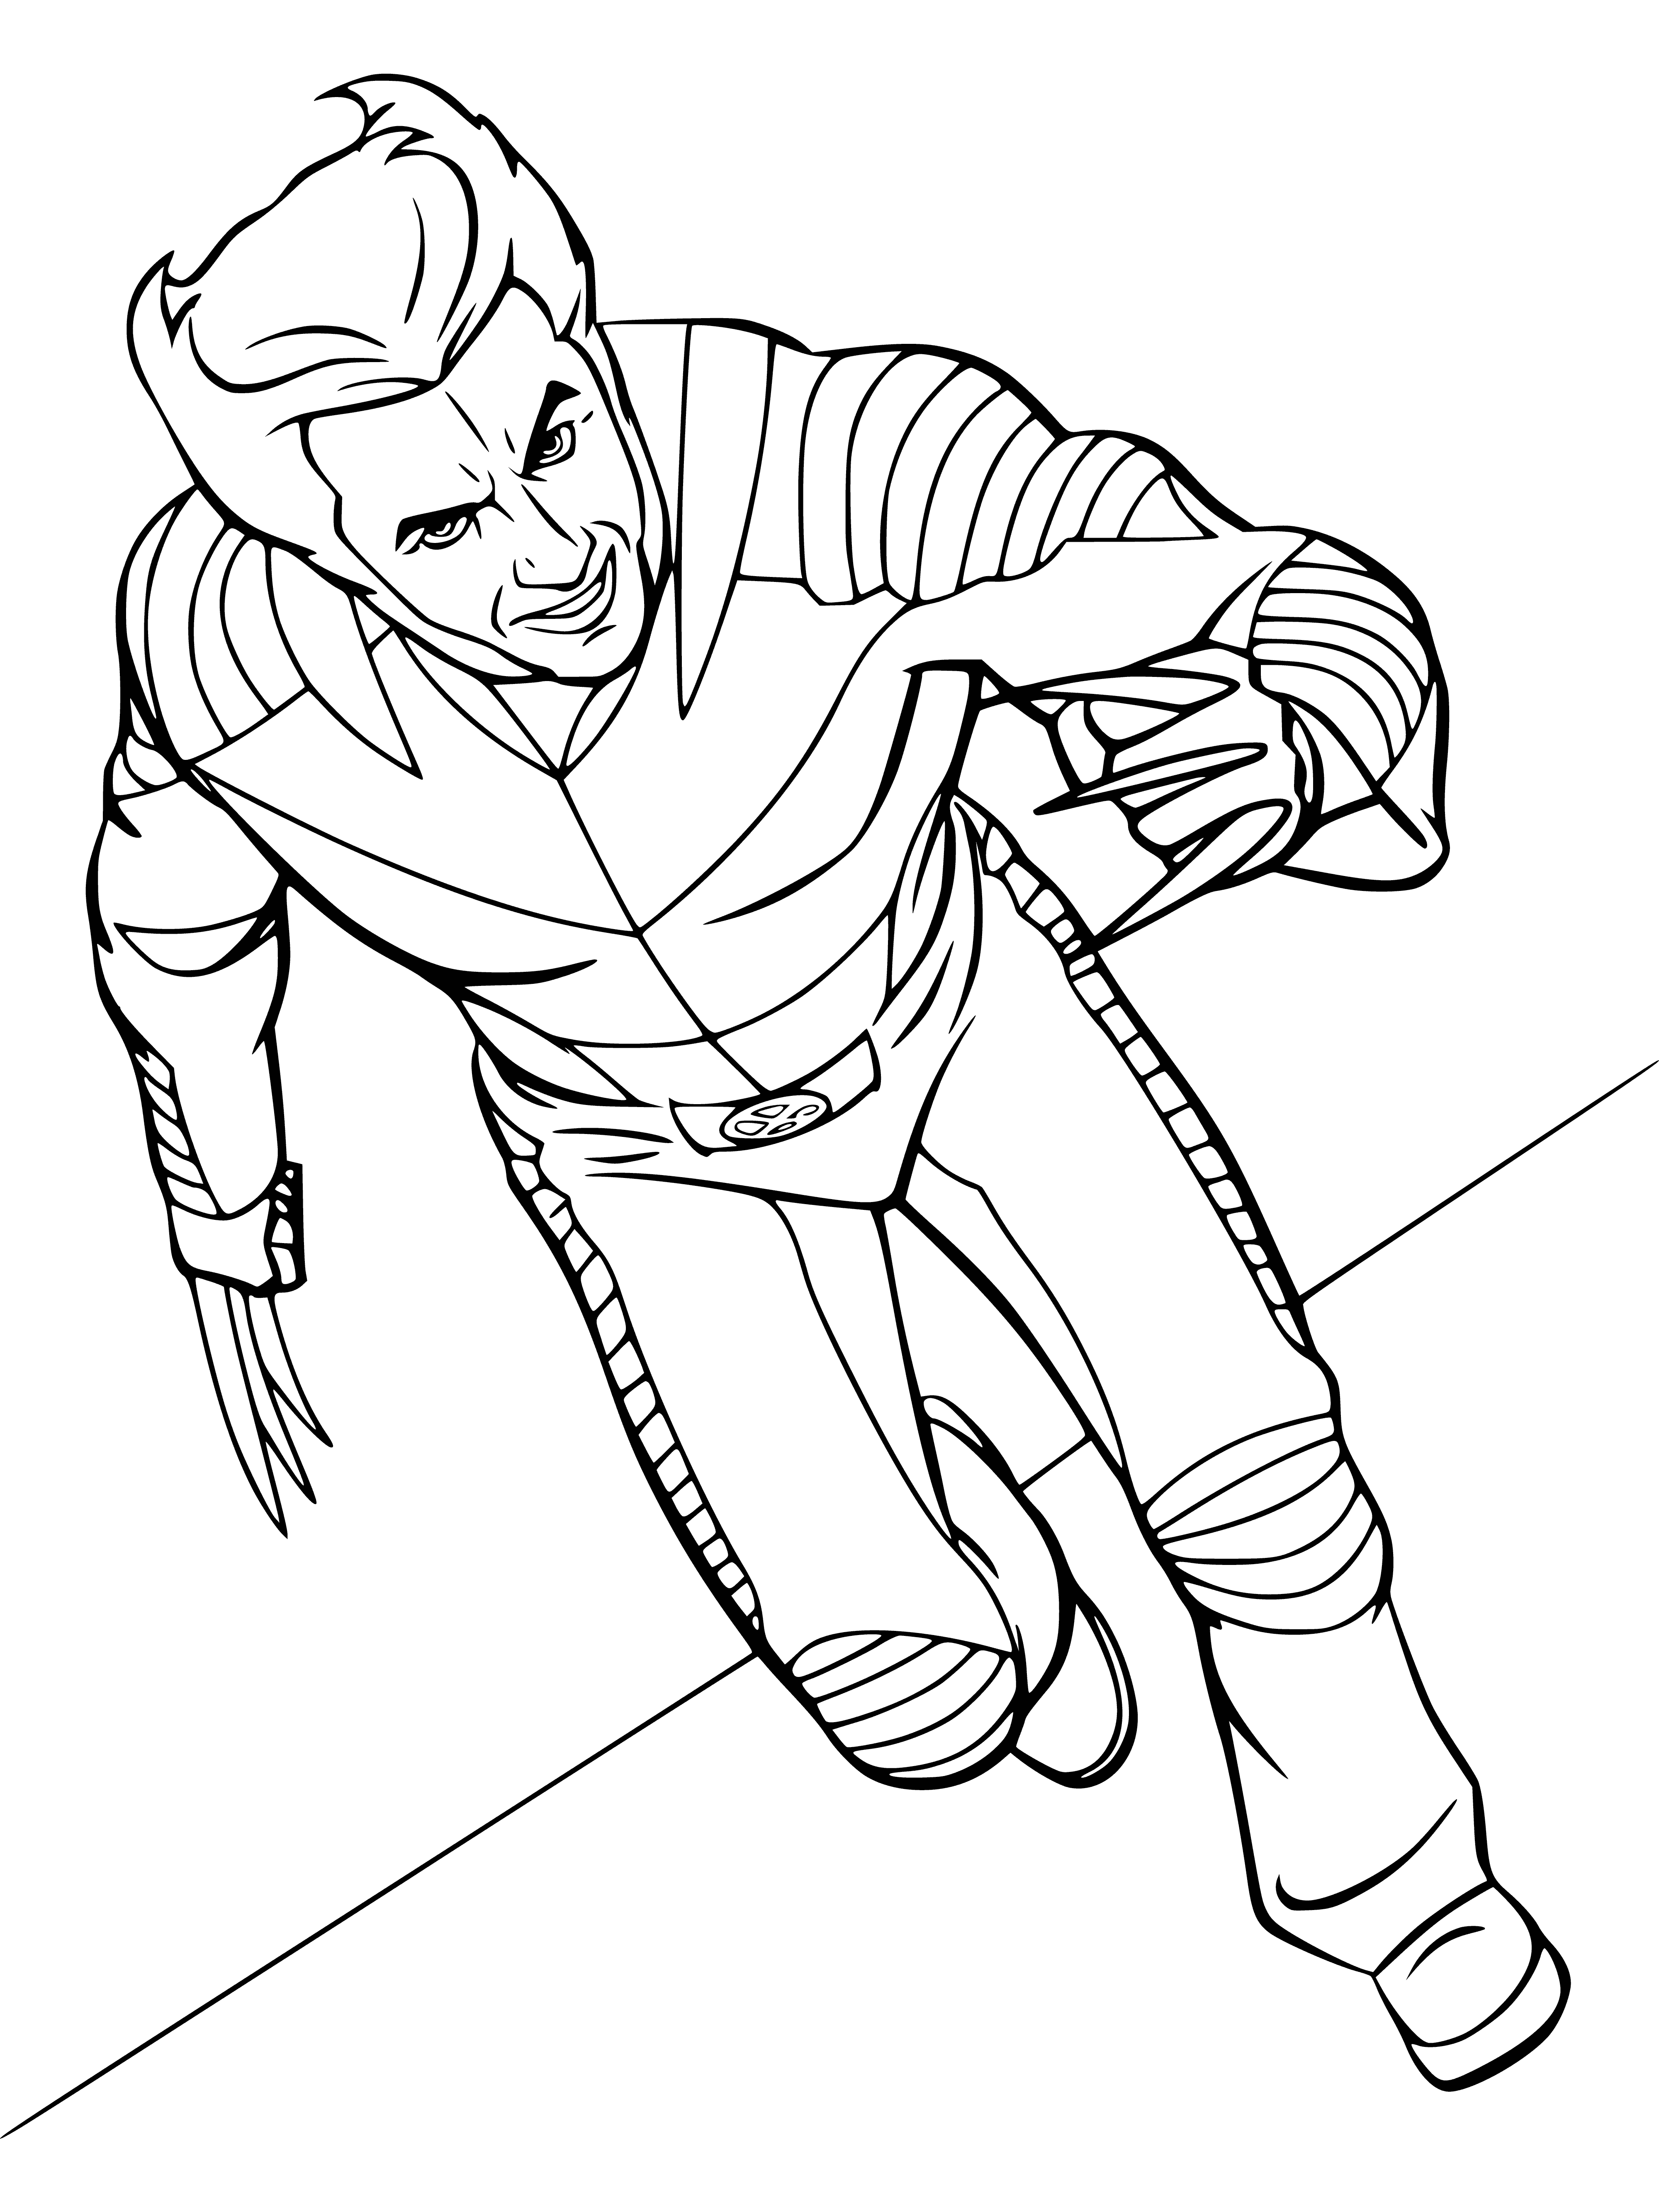 coloring page: A man with large knives and a skintight, mostly black outfit with yellow accents has piercing eyes.